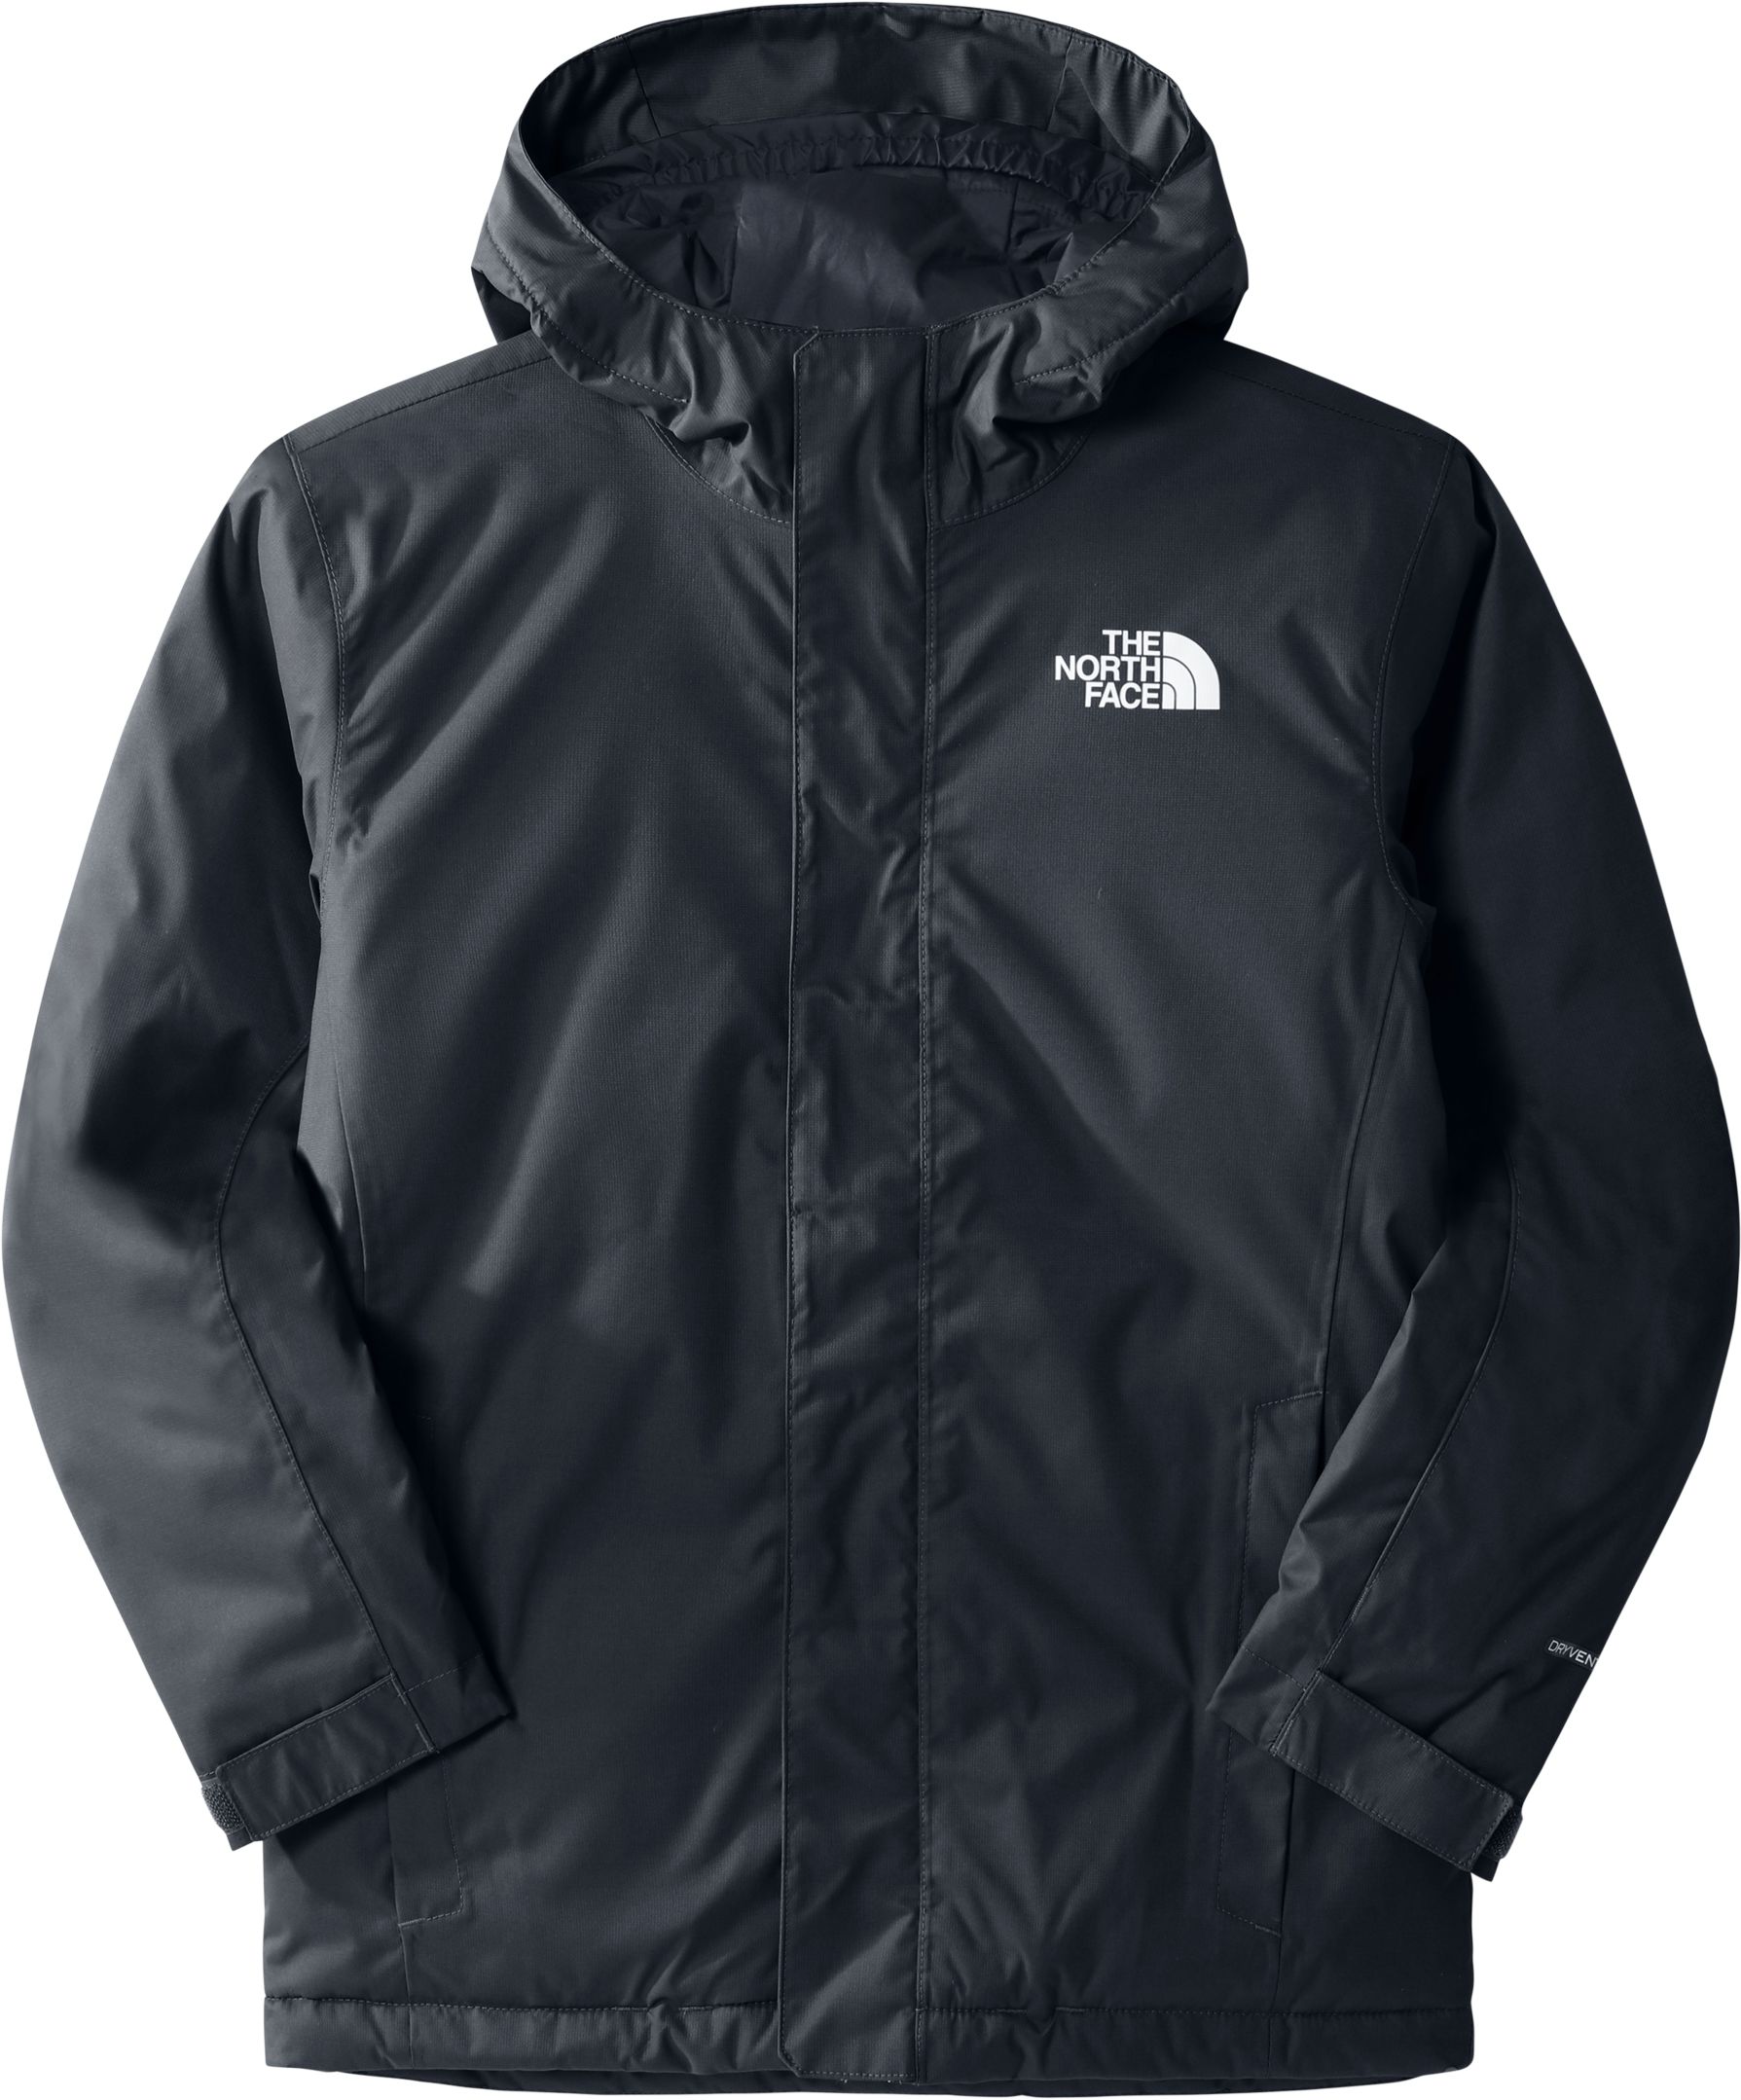 THE NORTH FACE, J TEEN SNOWQUEST JACKET